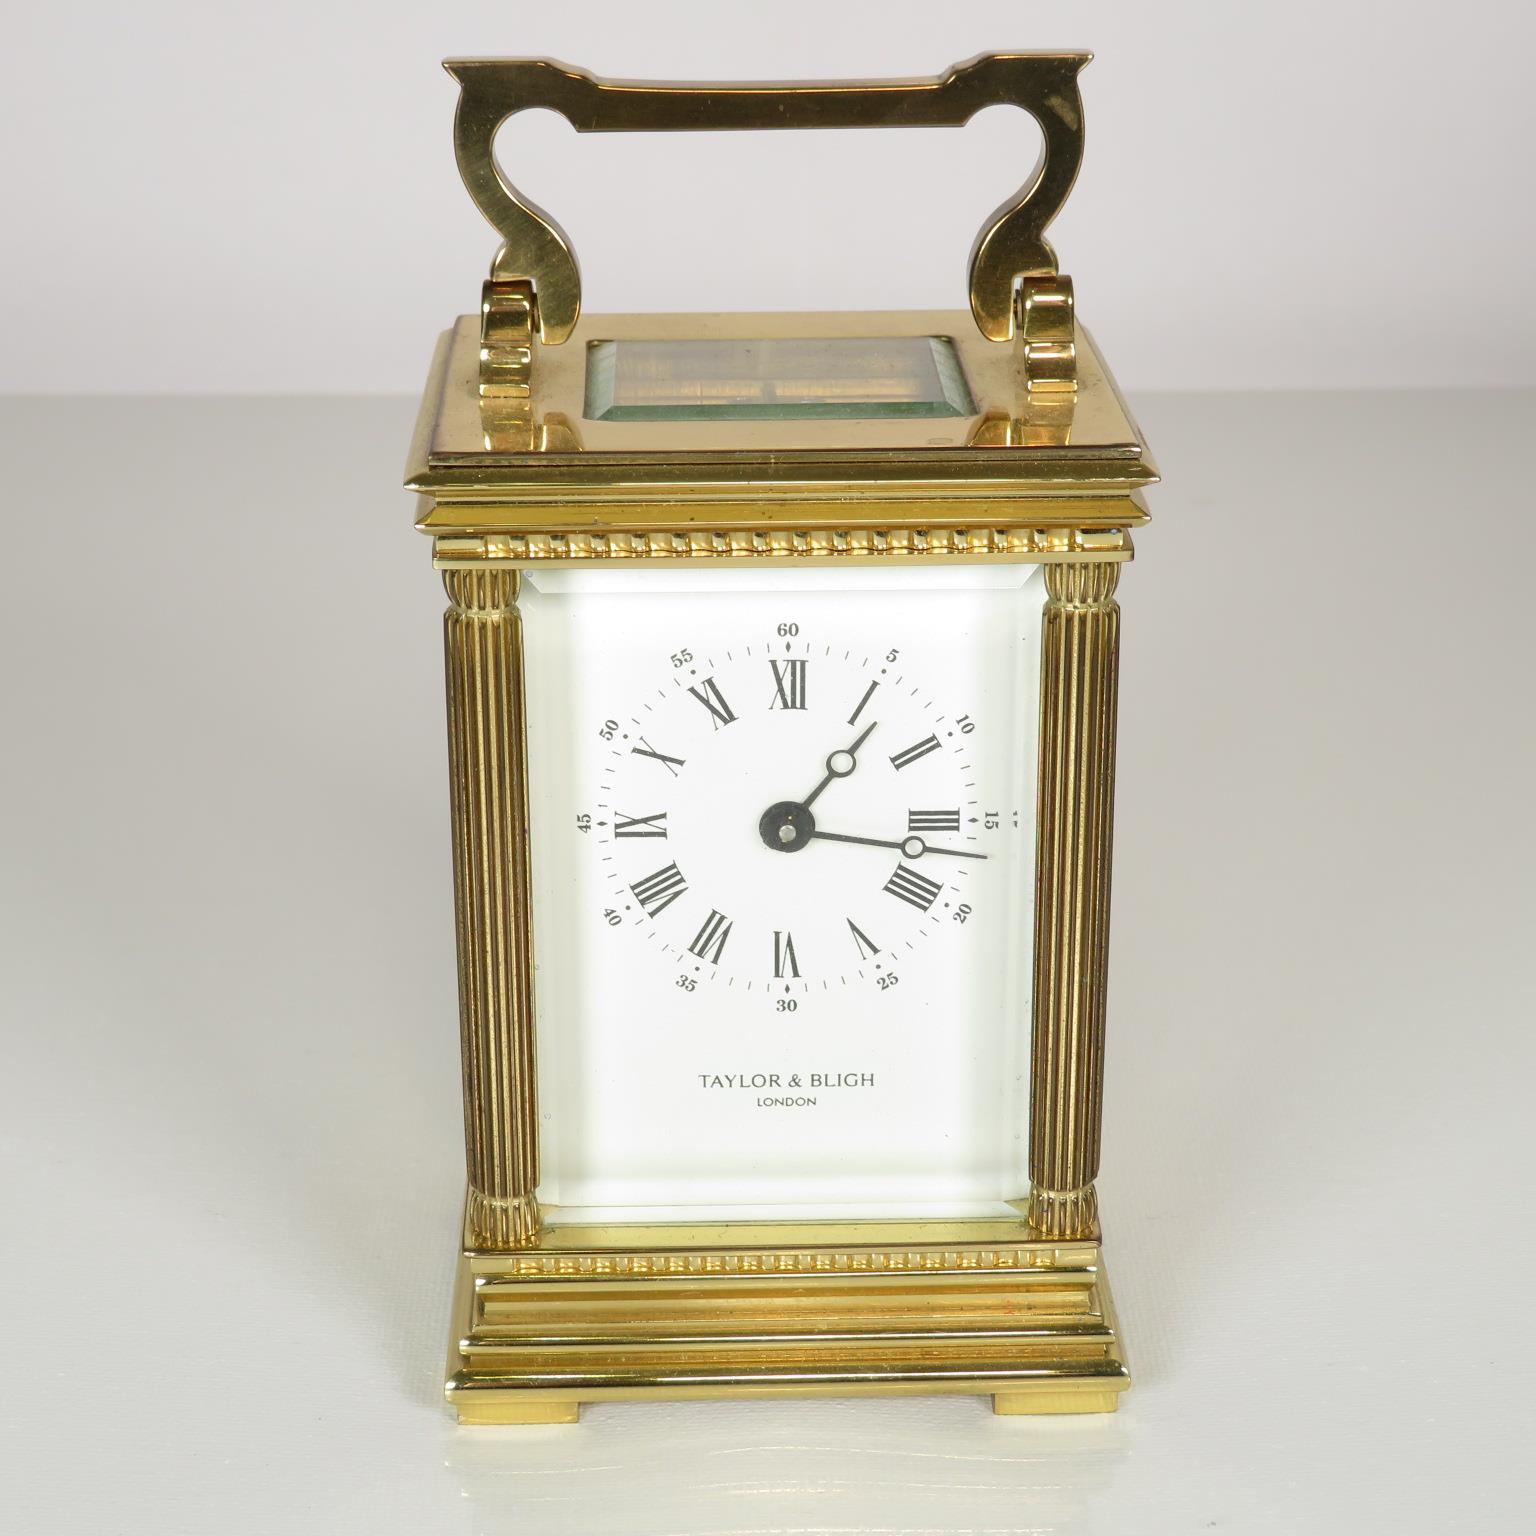 Mid sized carriage clock by Taylor and Bligh of London clock runs 125mm x 85mm //